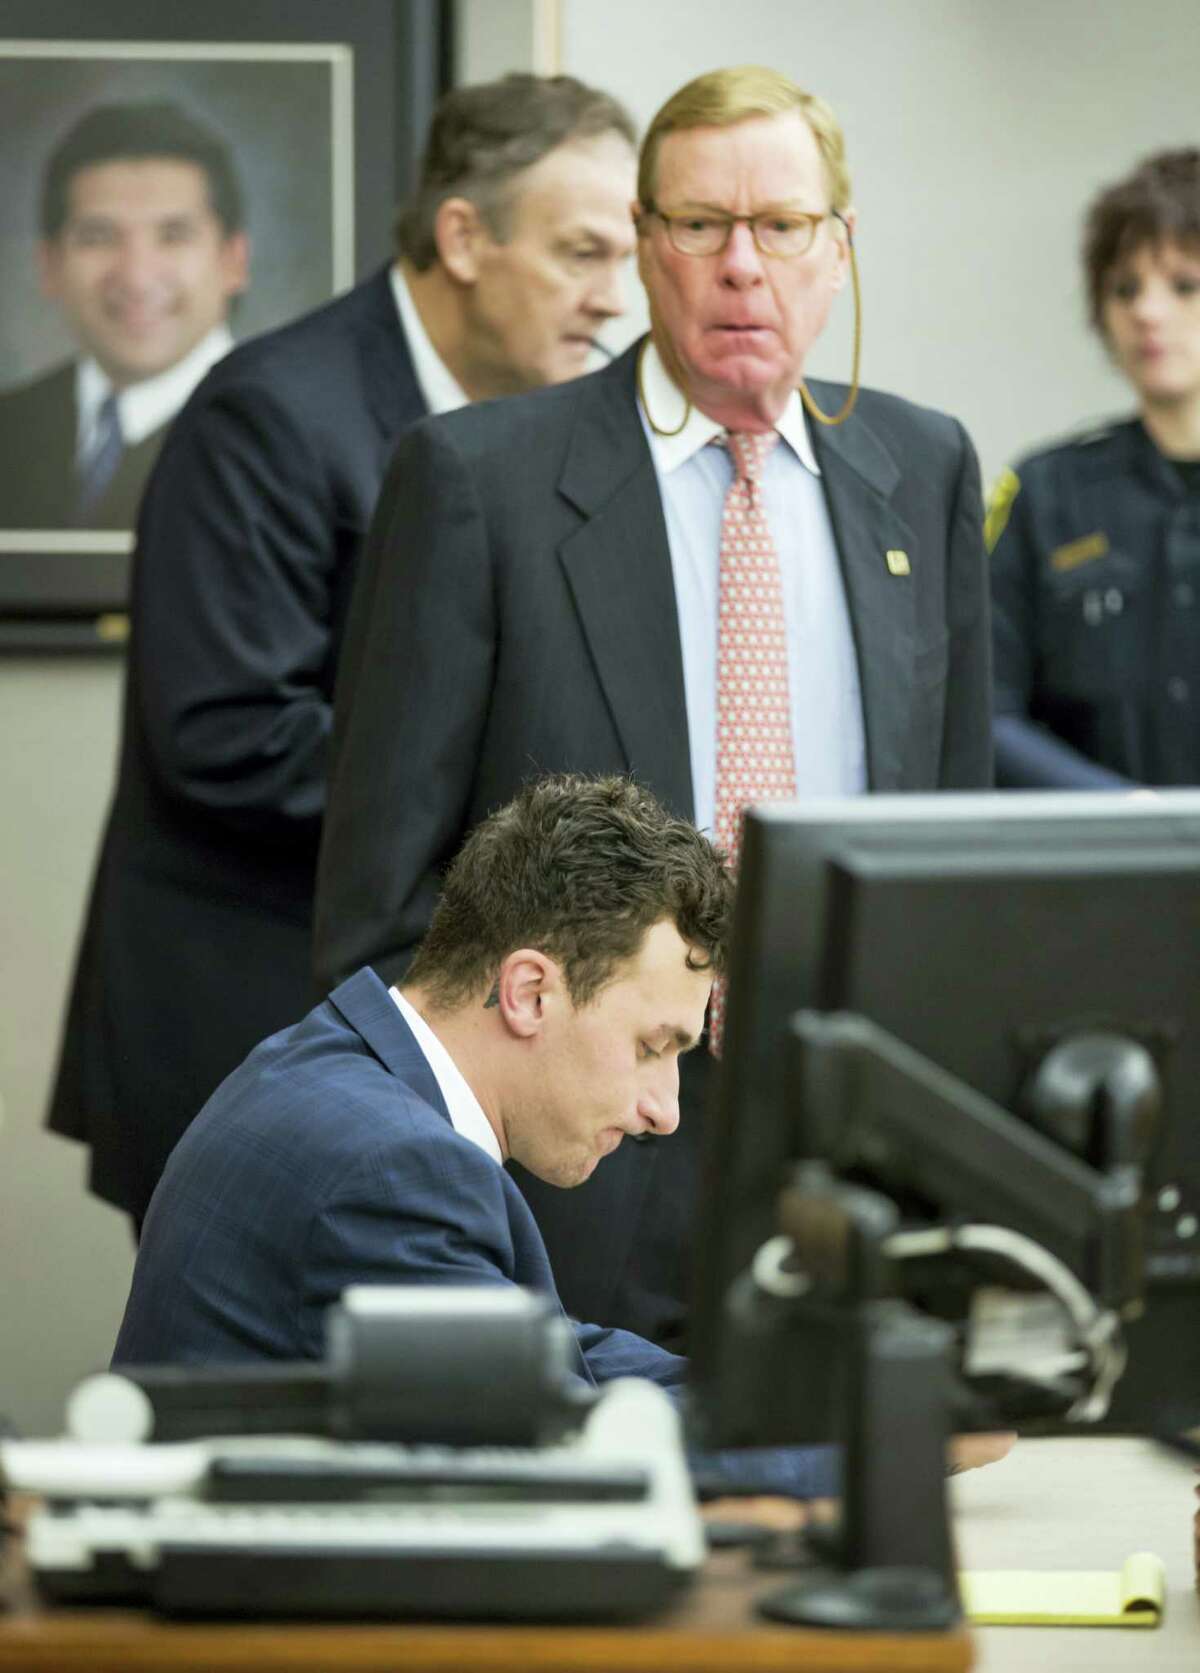 Former Cleveland Browns quarterback Johnny Manziel sits at the defense table as his attorney Bob Hinton, center, looks on during a hearing, in Dallas.